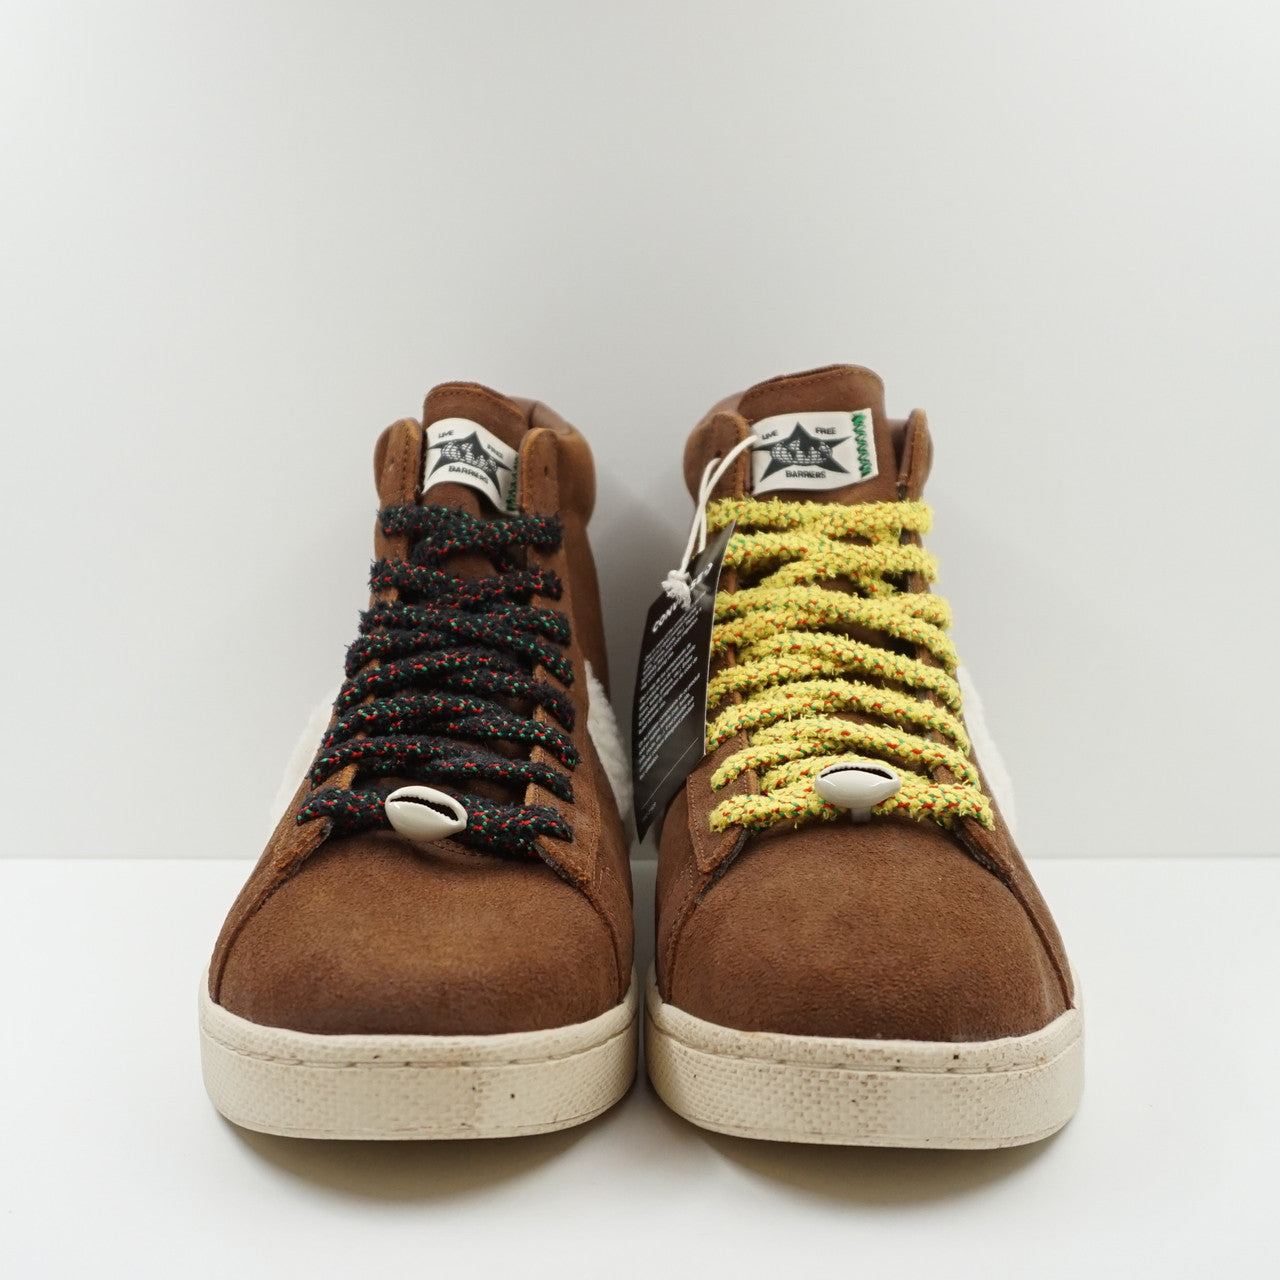 Converse Pro Leather Barriers Worldwide